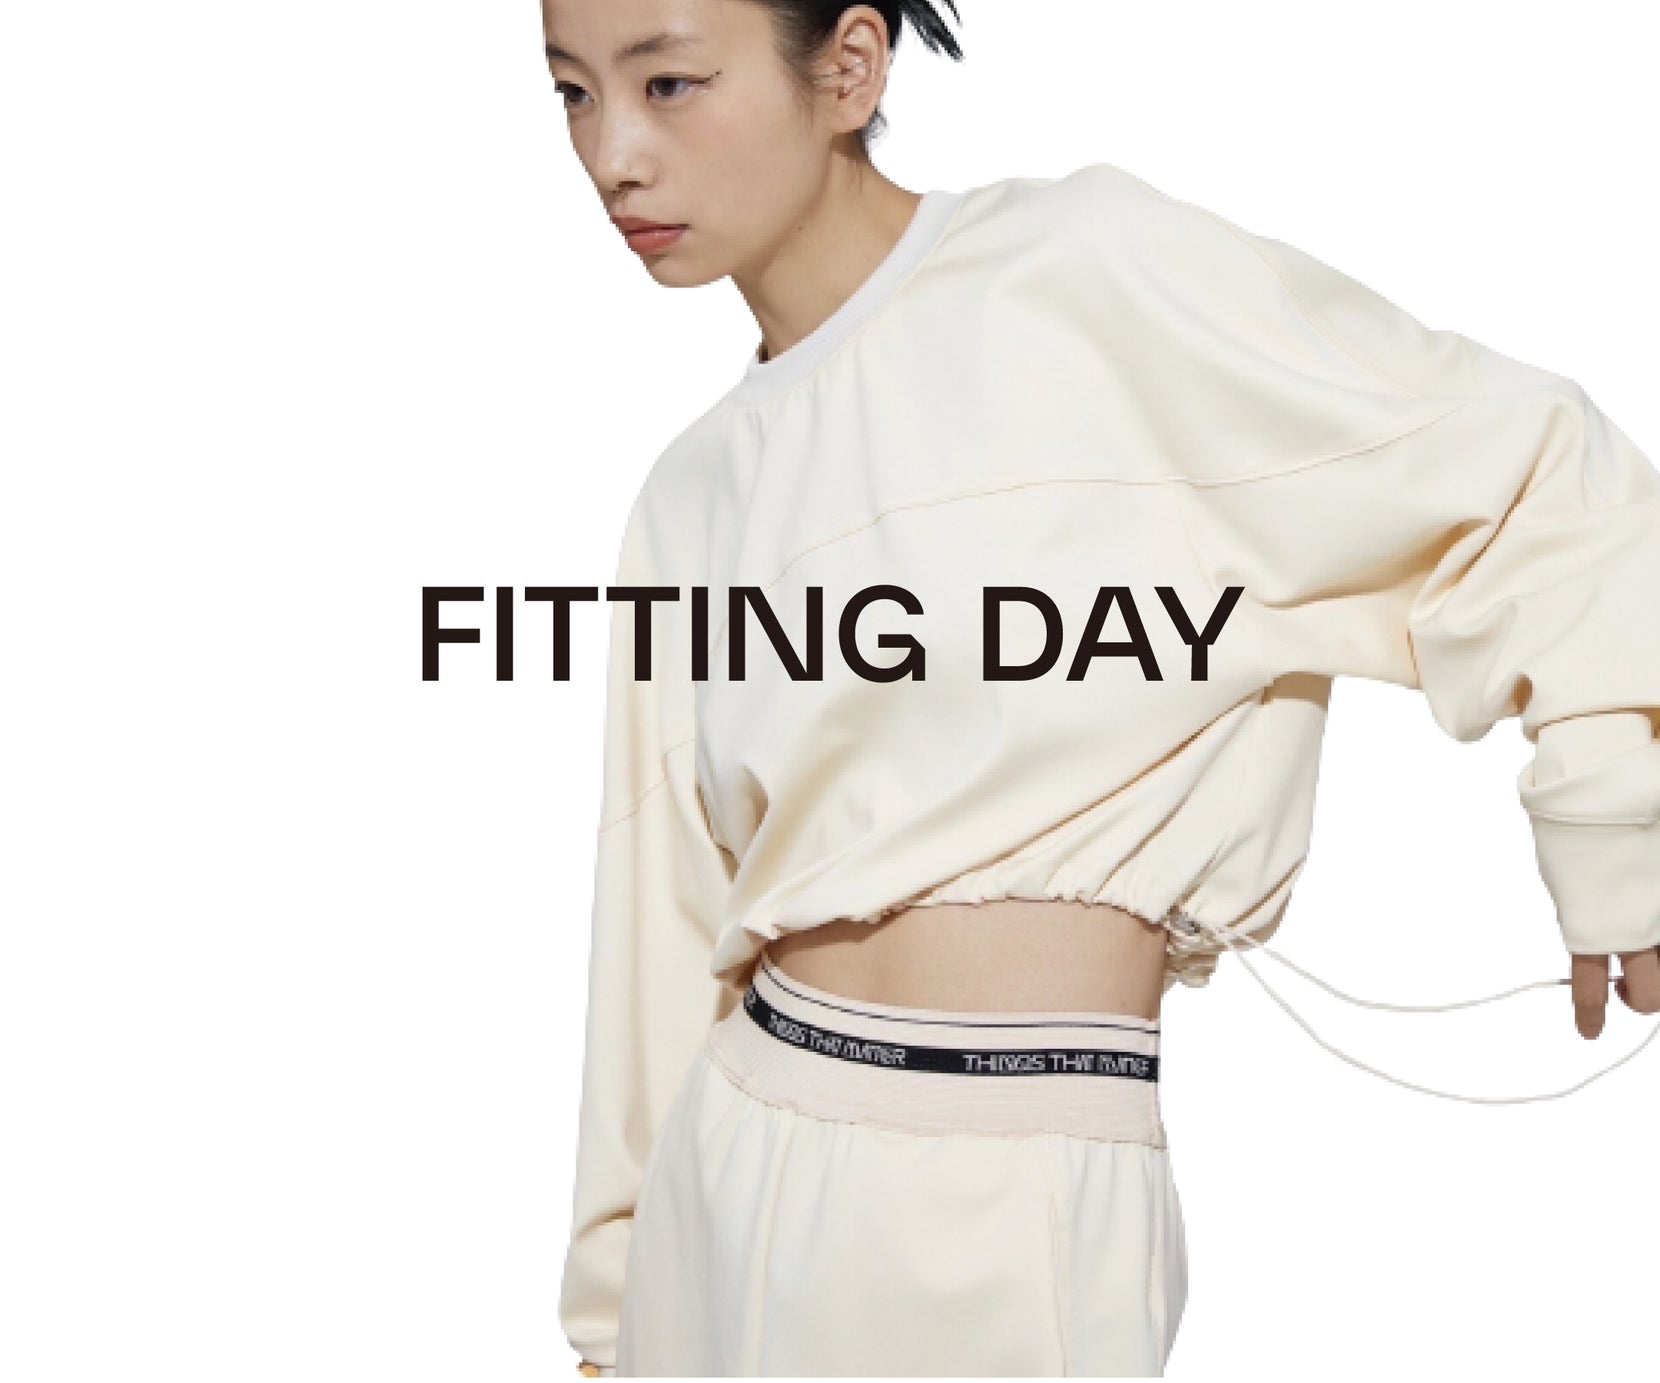 FITTING DAY 11/22(TUE) - 23(WED) IN 原宿 | NEWS